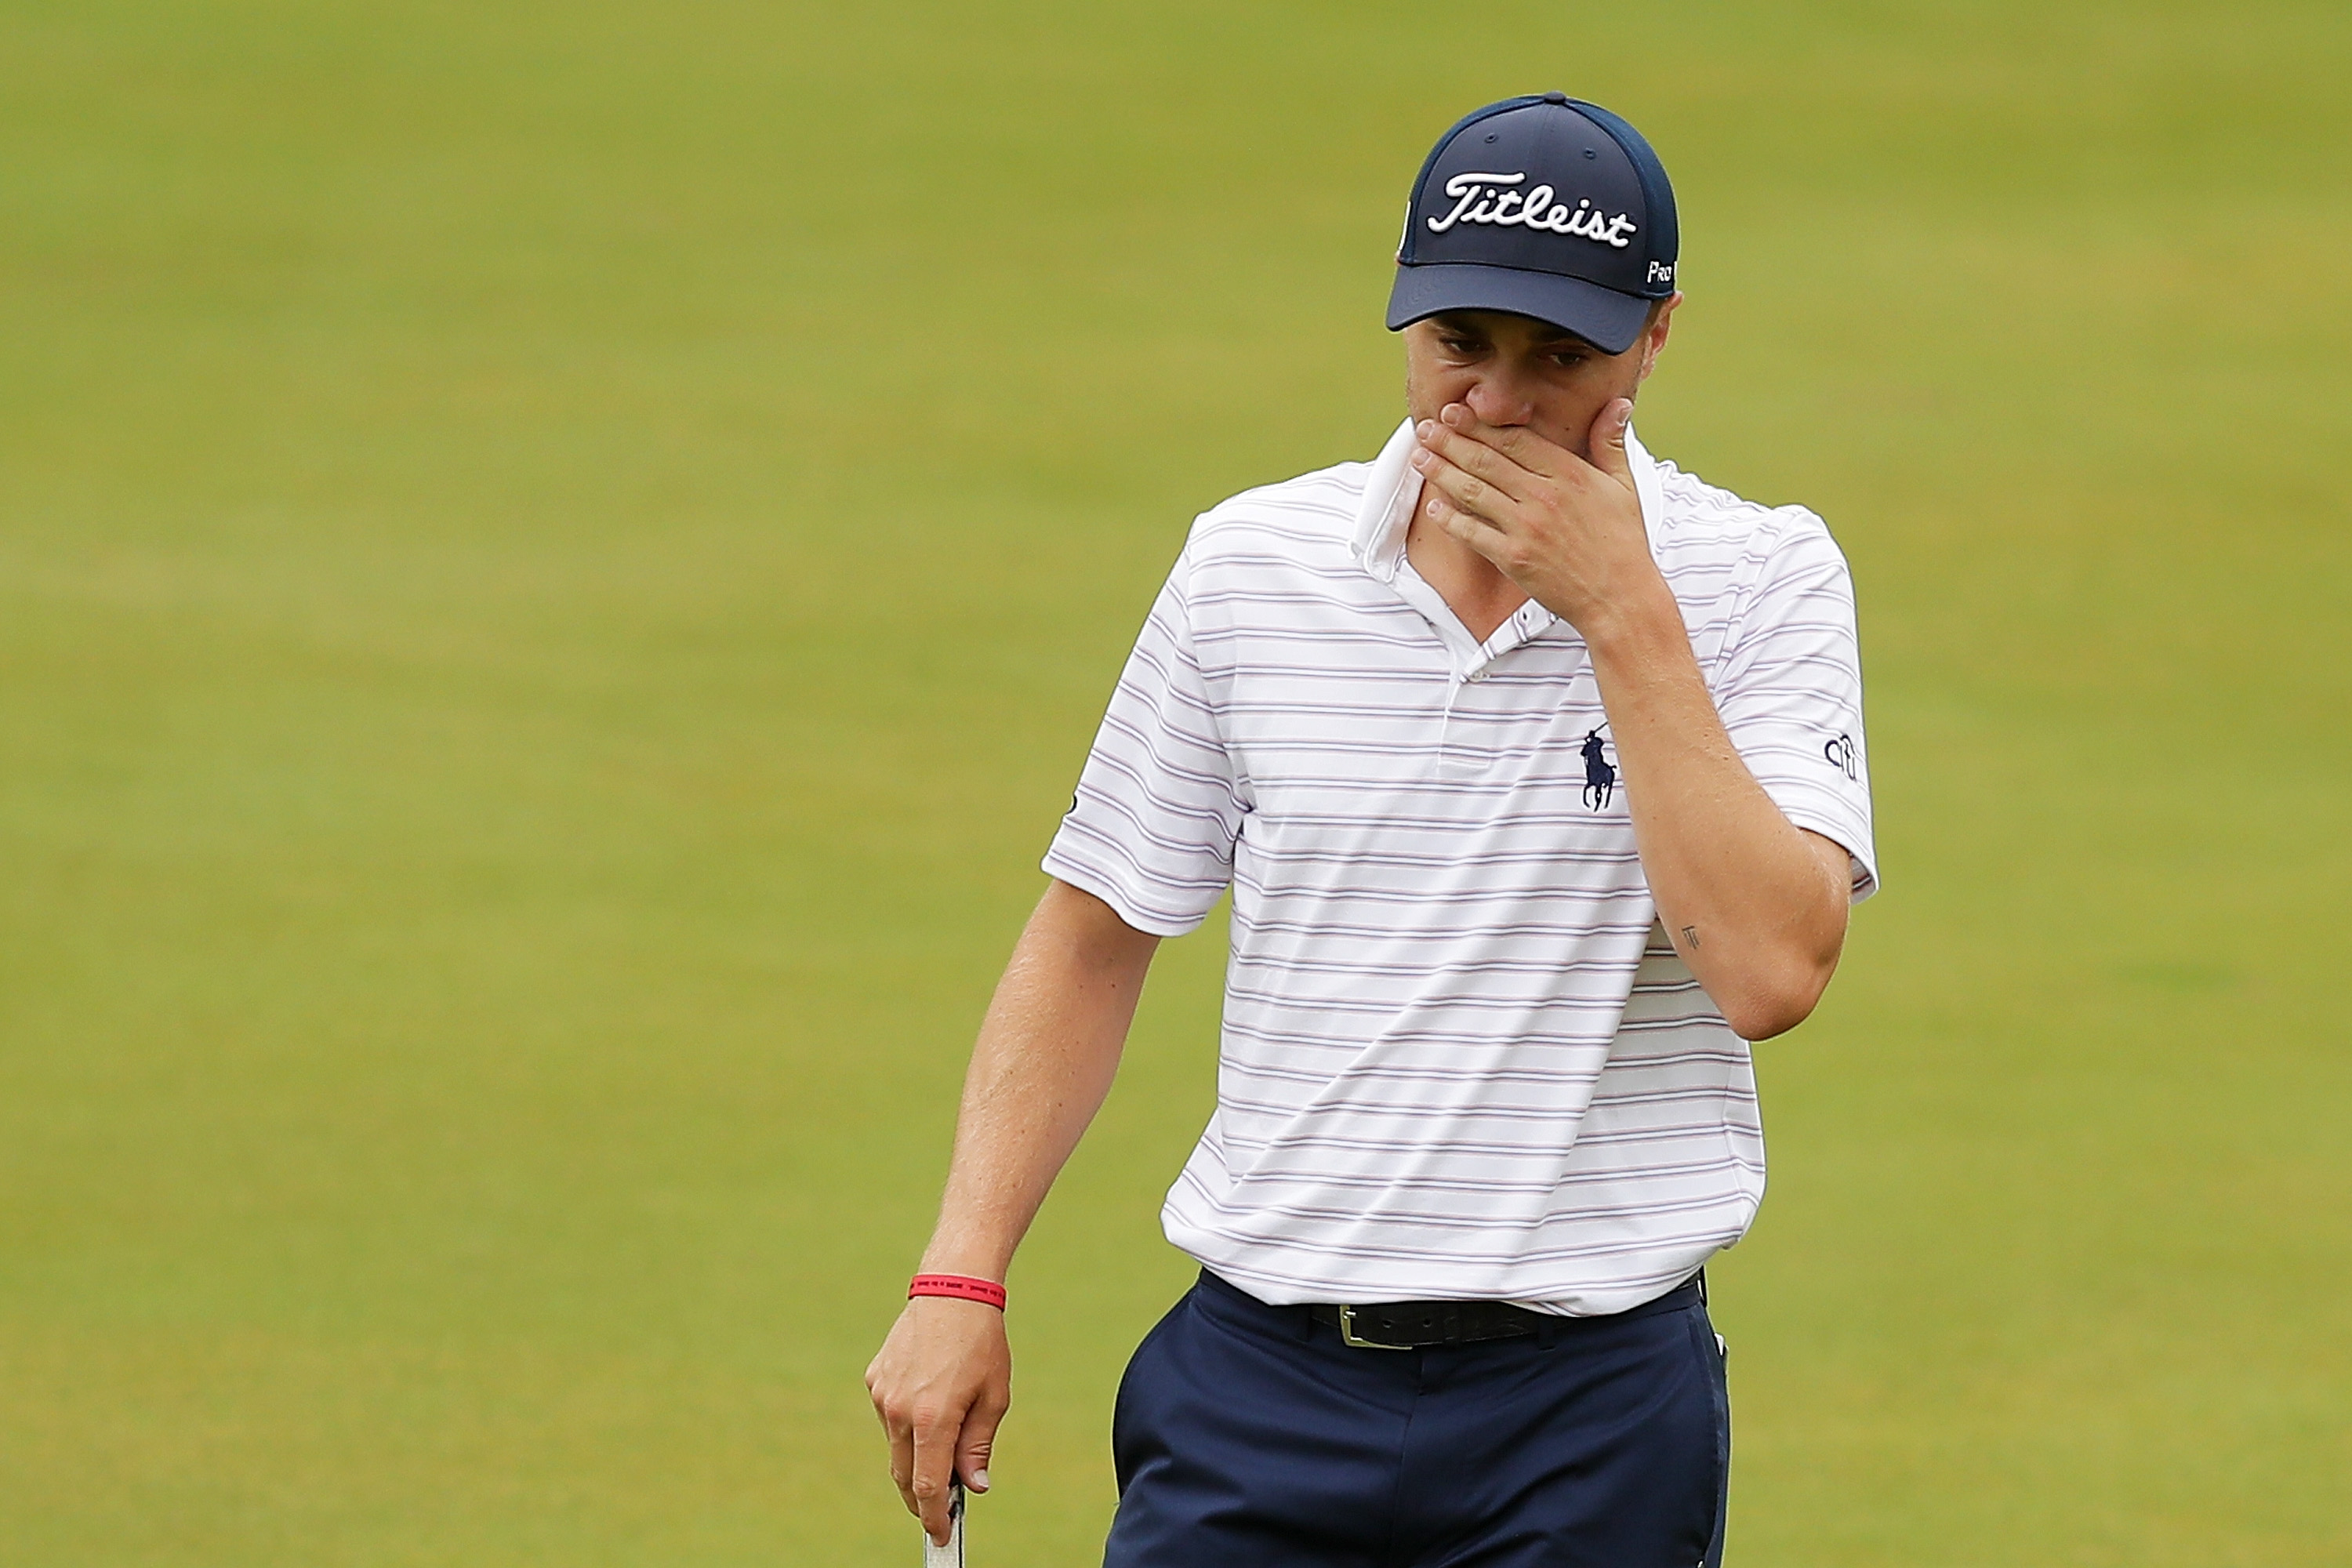 Justin Thomas on missing World No.1: I couldn't stop thinking about it